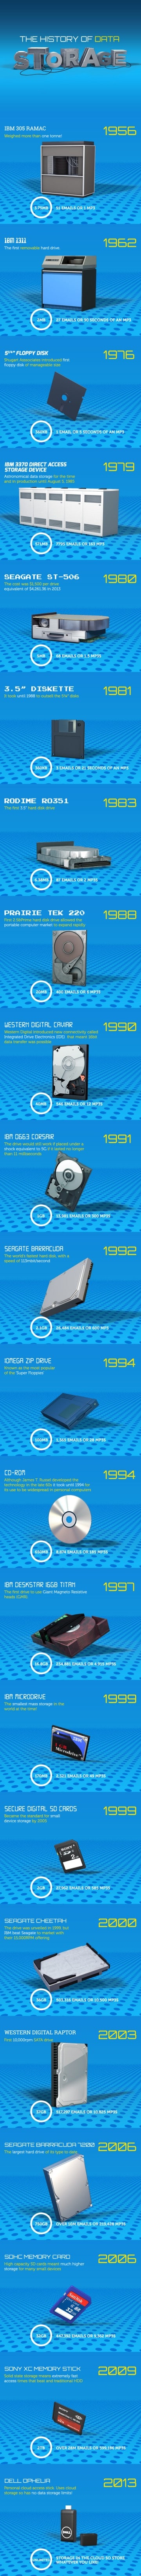 Infographic: The History Of Data Storage